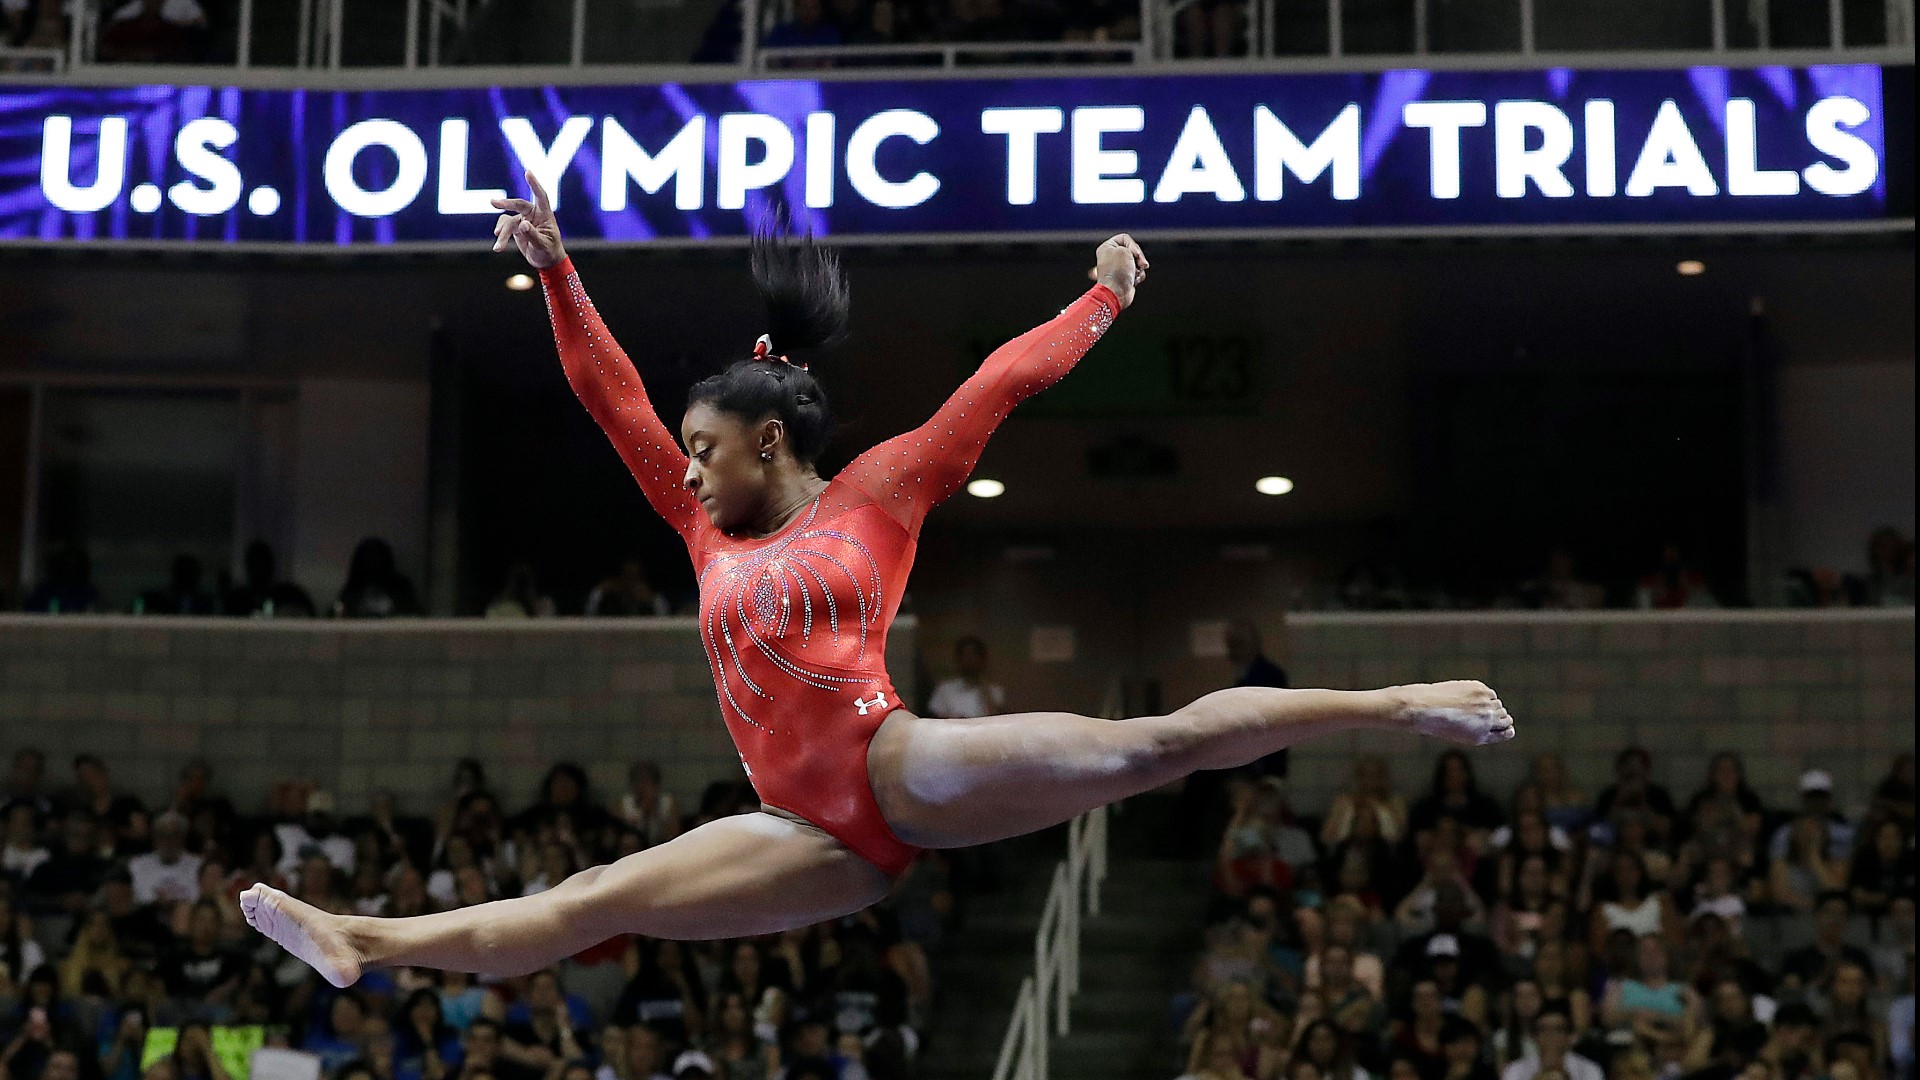 Biles recently won her seventh U.S. title, more than any woman in history